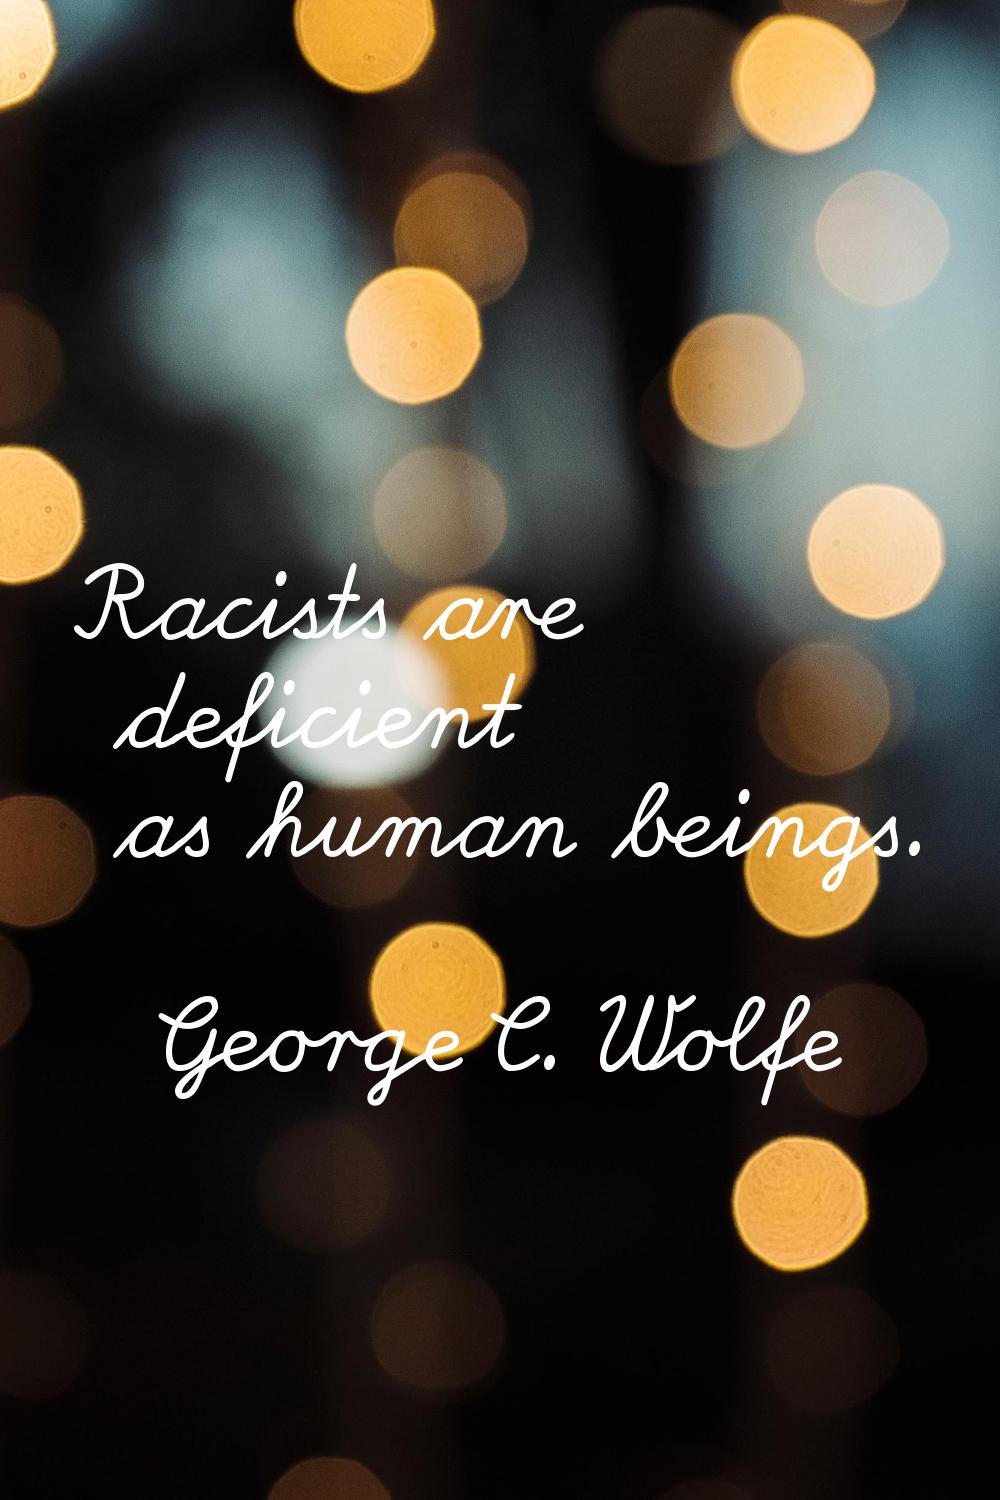 Racists are deficient as human beings.